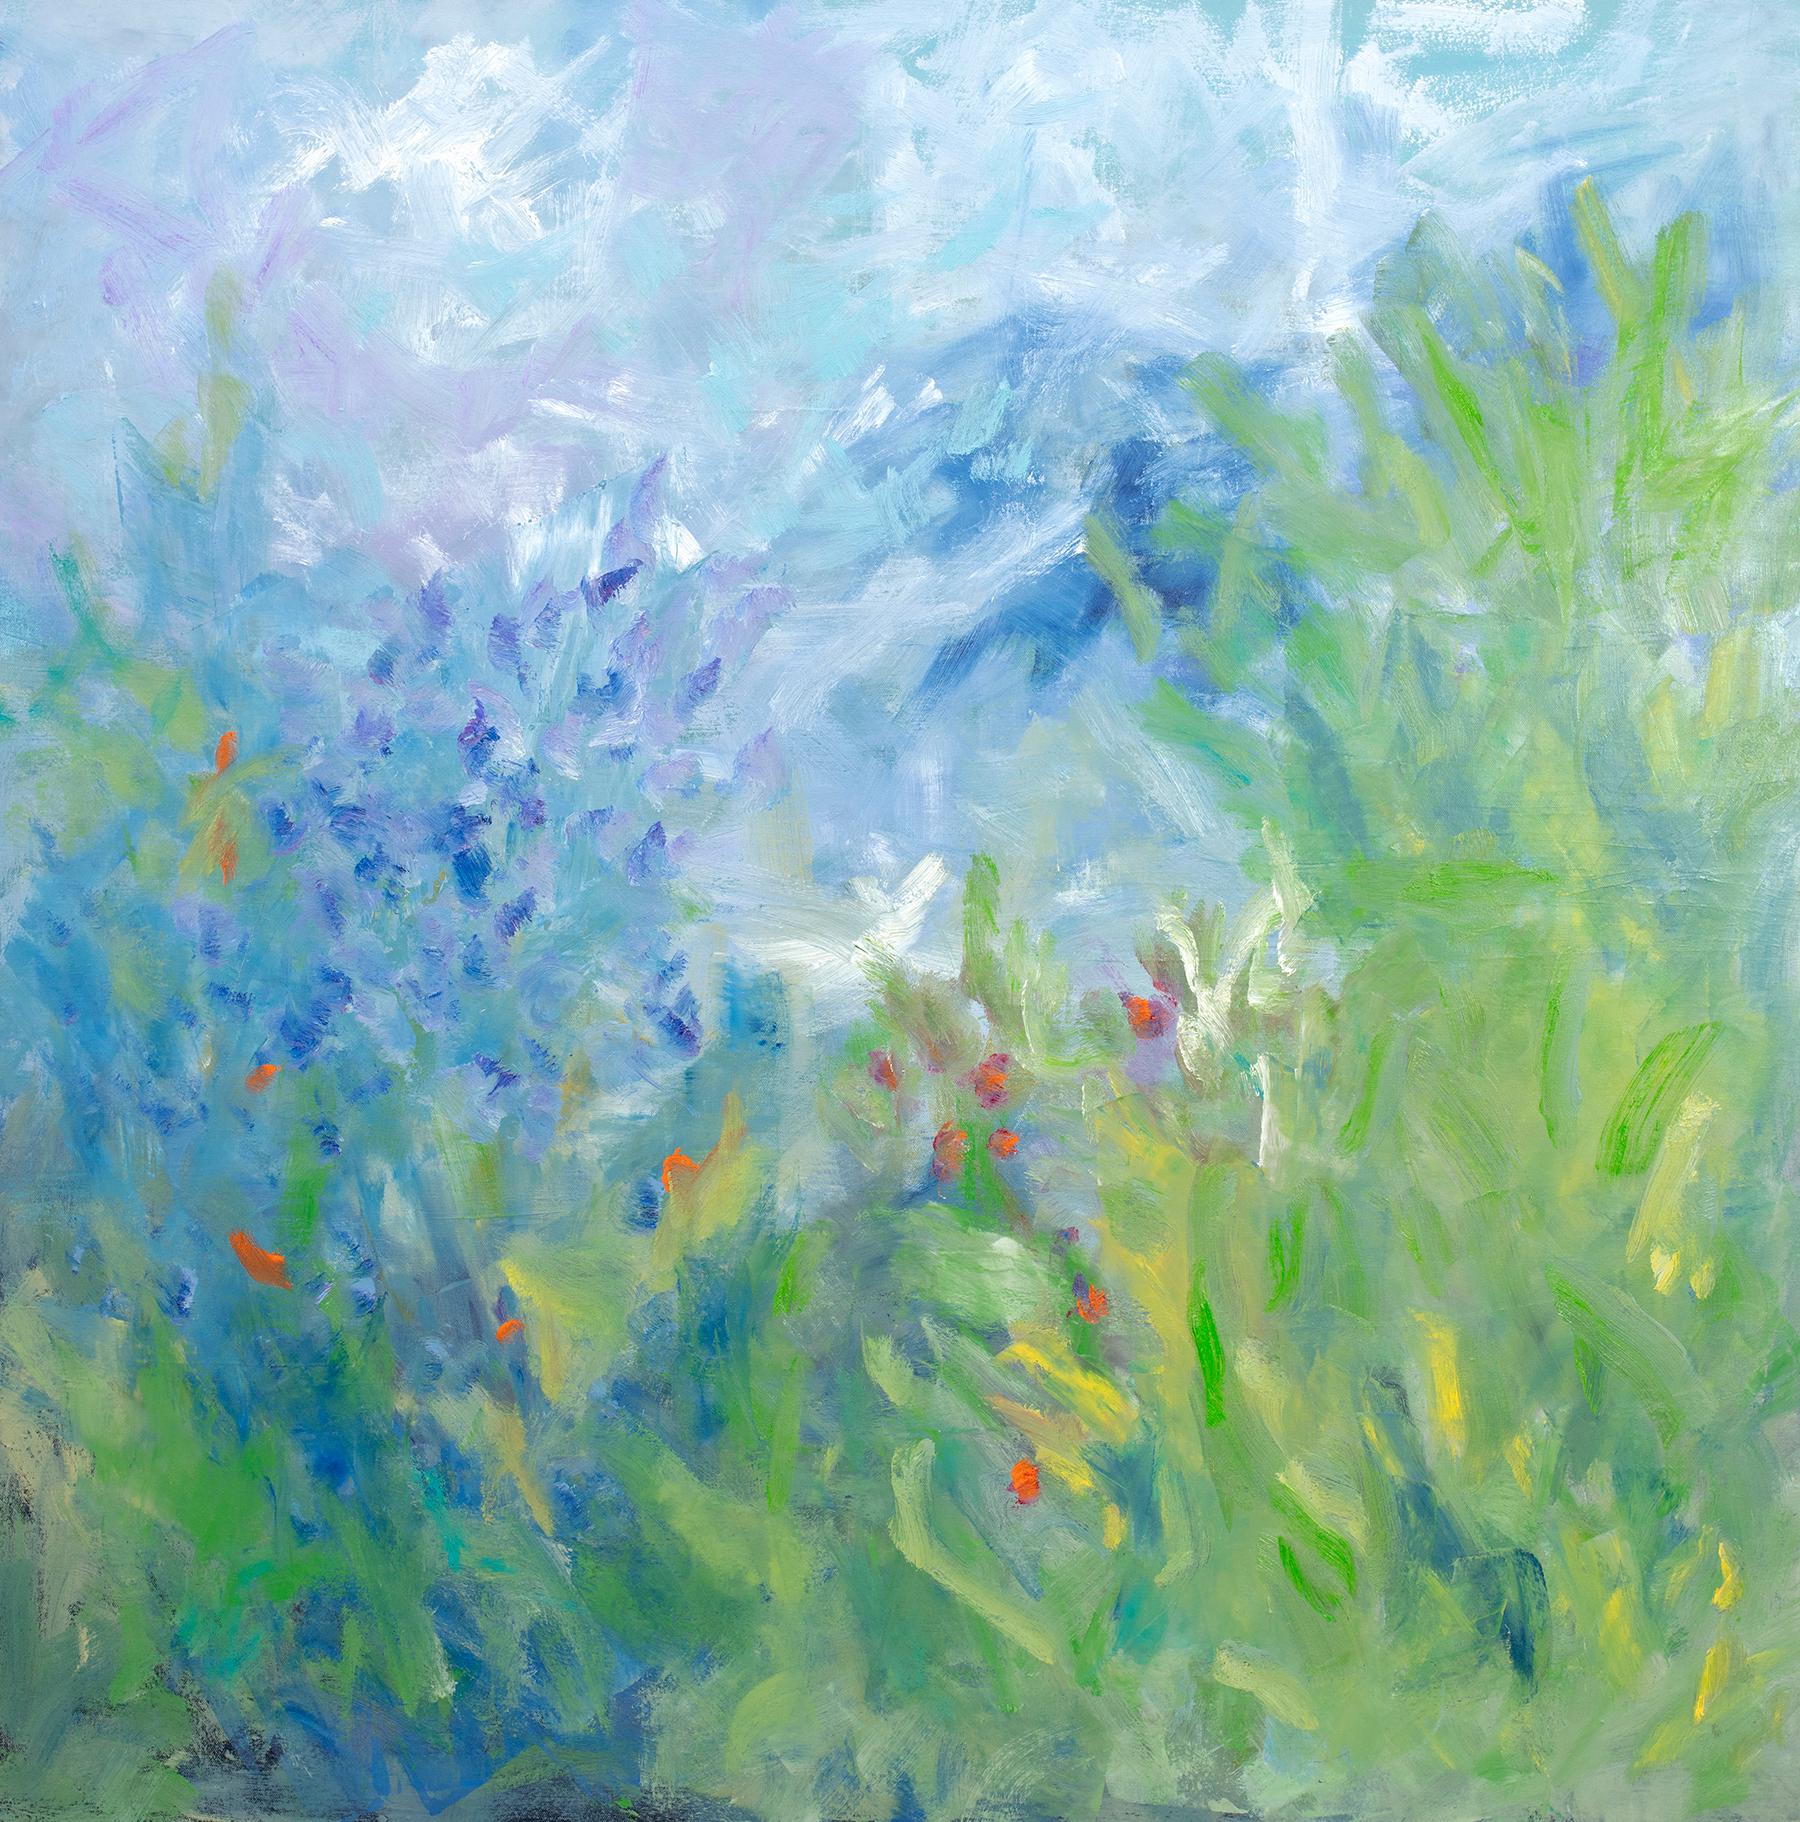 This large abstract floral painting features a light cool palette of green, blue, and lavender, with contrasting dabs of red. The artist layers expressive strokes of paint to create an abstracted garden scene, creating an aesthetic of small buds and